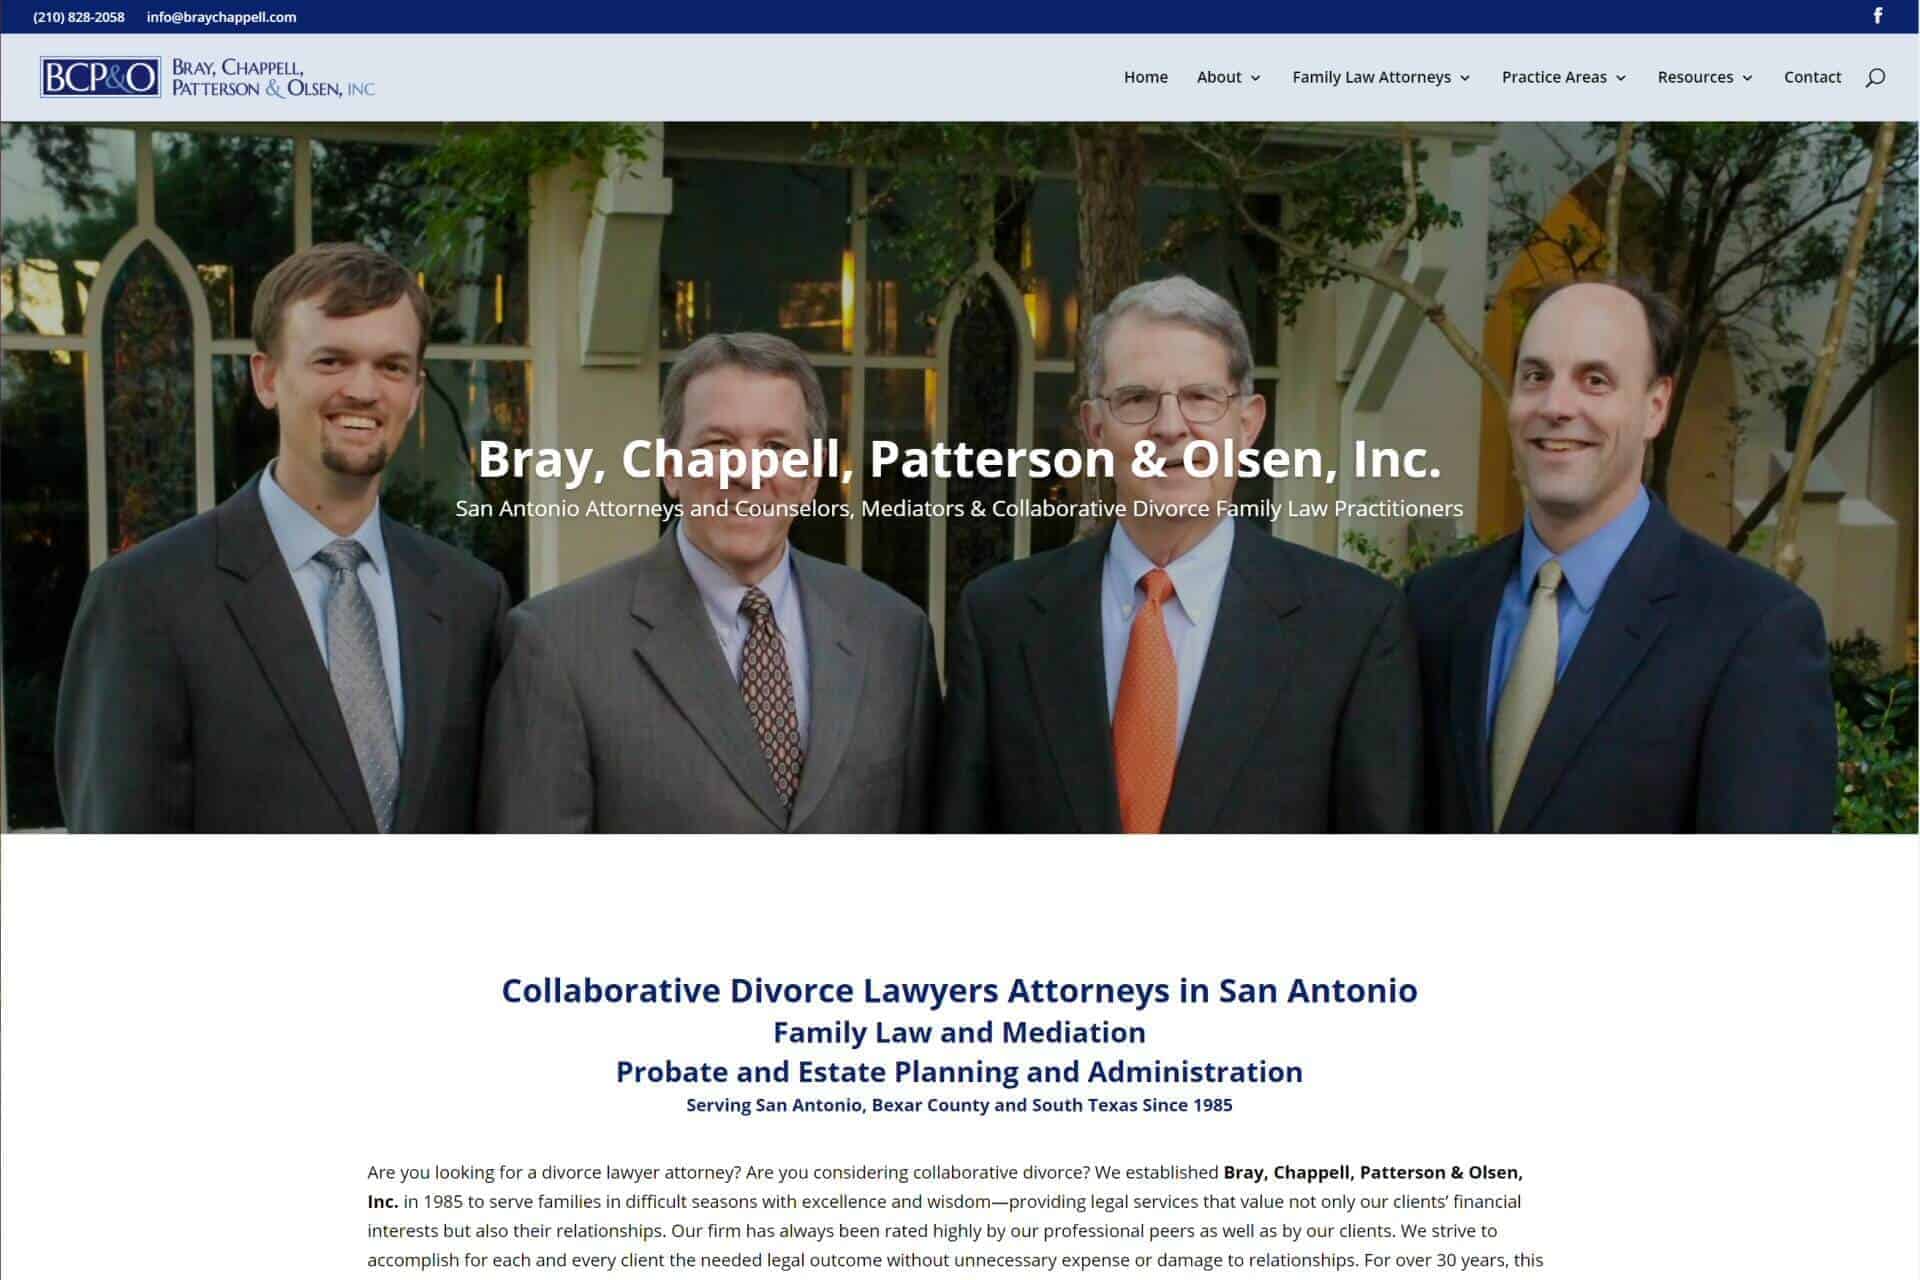 Bray, Chappell, Patterson & Olsen, Inc. by Eagle Custom Apparel